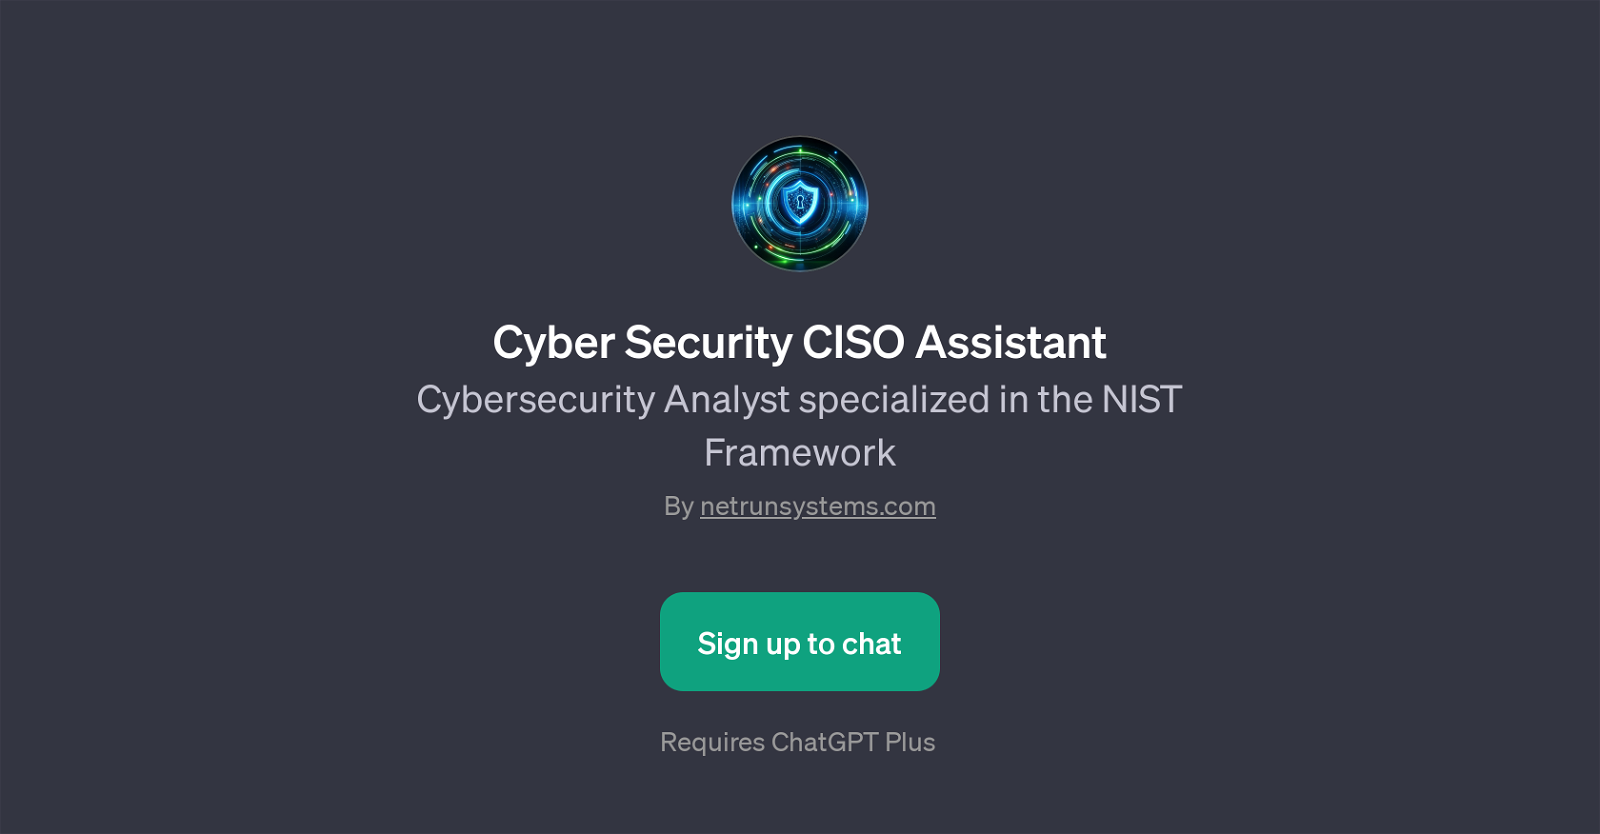 Cyber Security CISO Assistant website